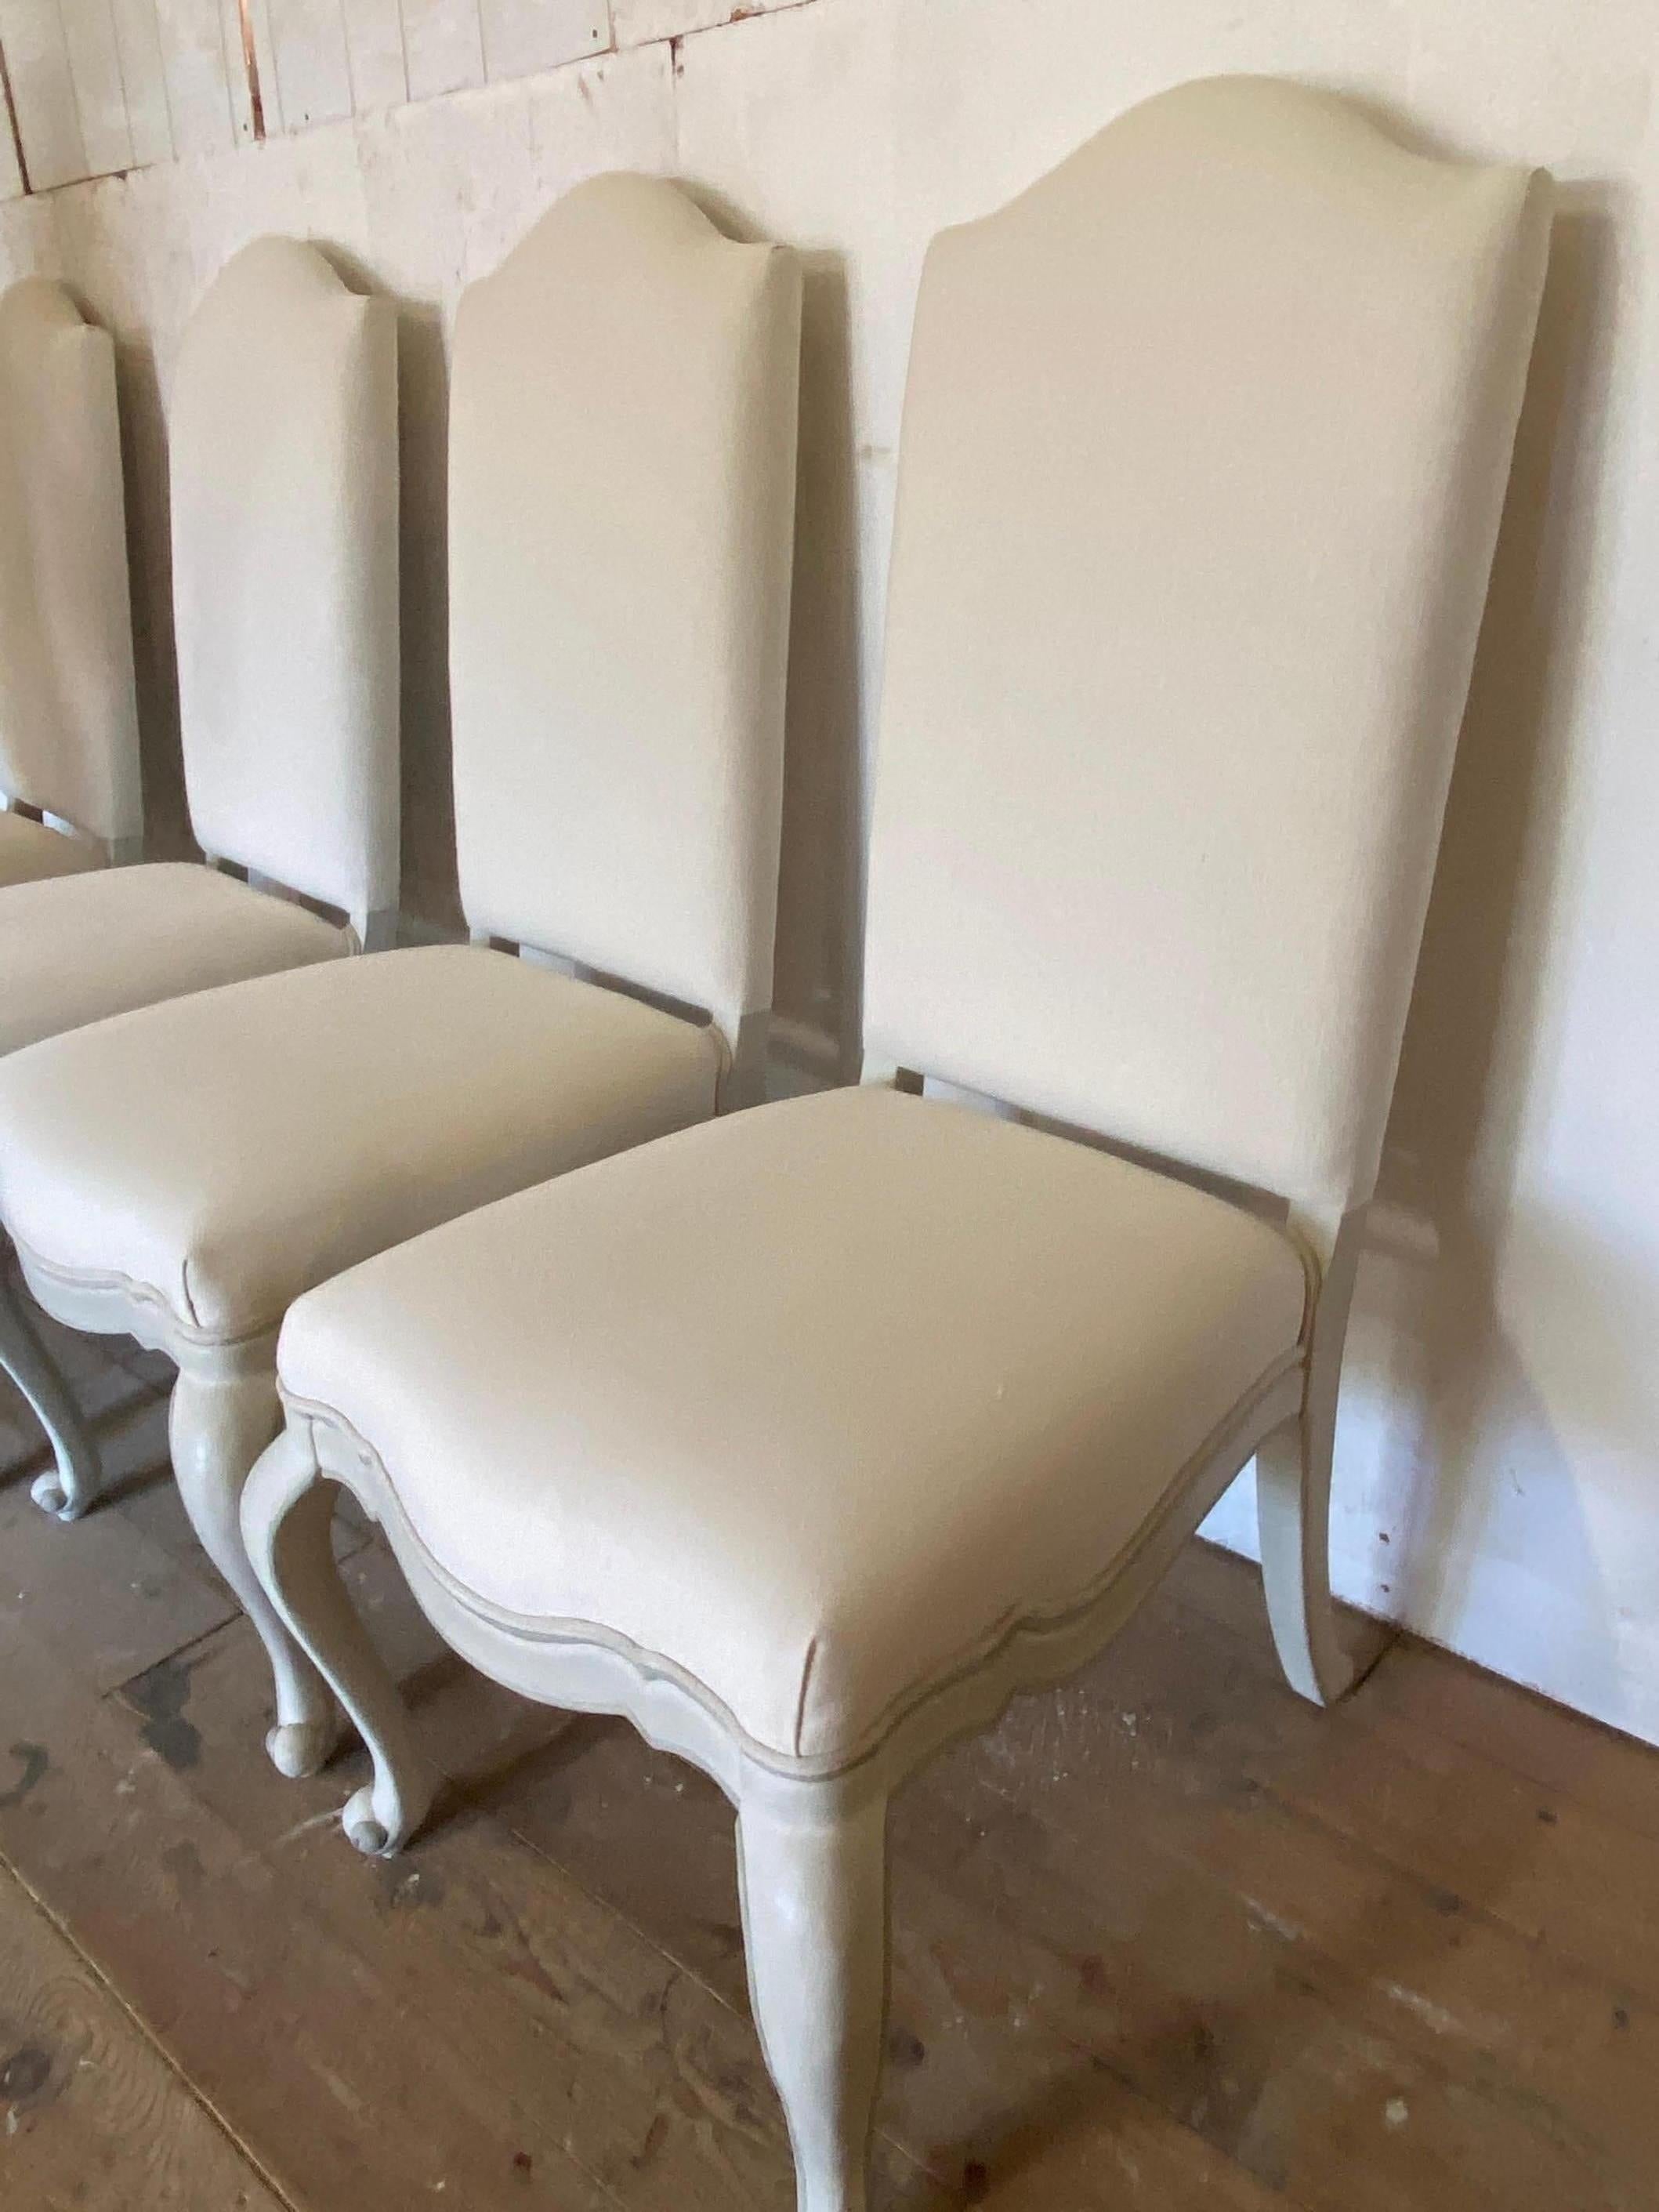 Set of 6 high back Louis XV, French Provincial size painted dining chairs upholstered with white linen fabric, painted a light grey with darker grey trim. Front two legs of each chair have carved details.